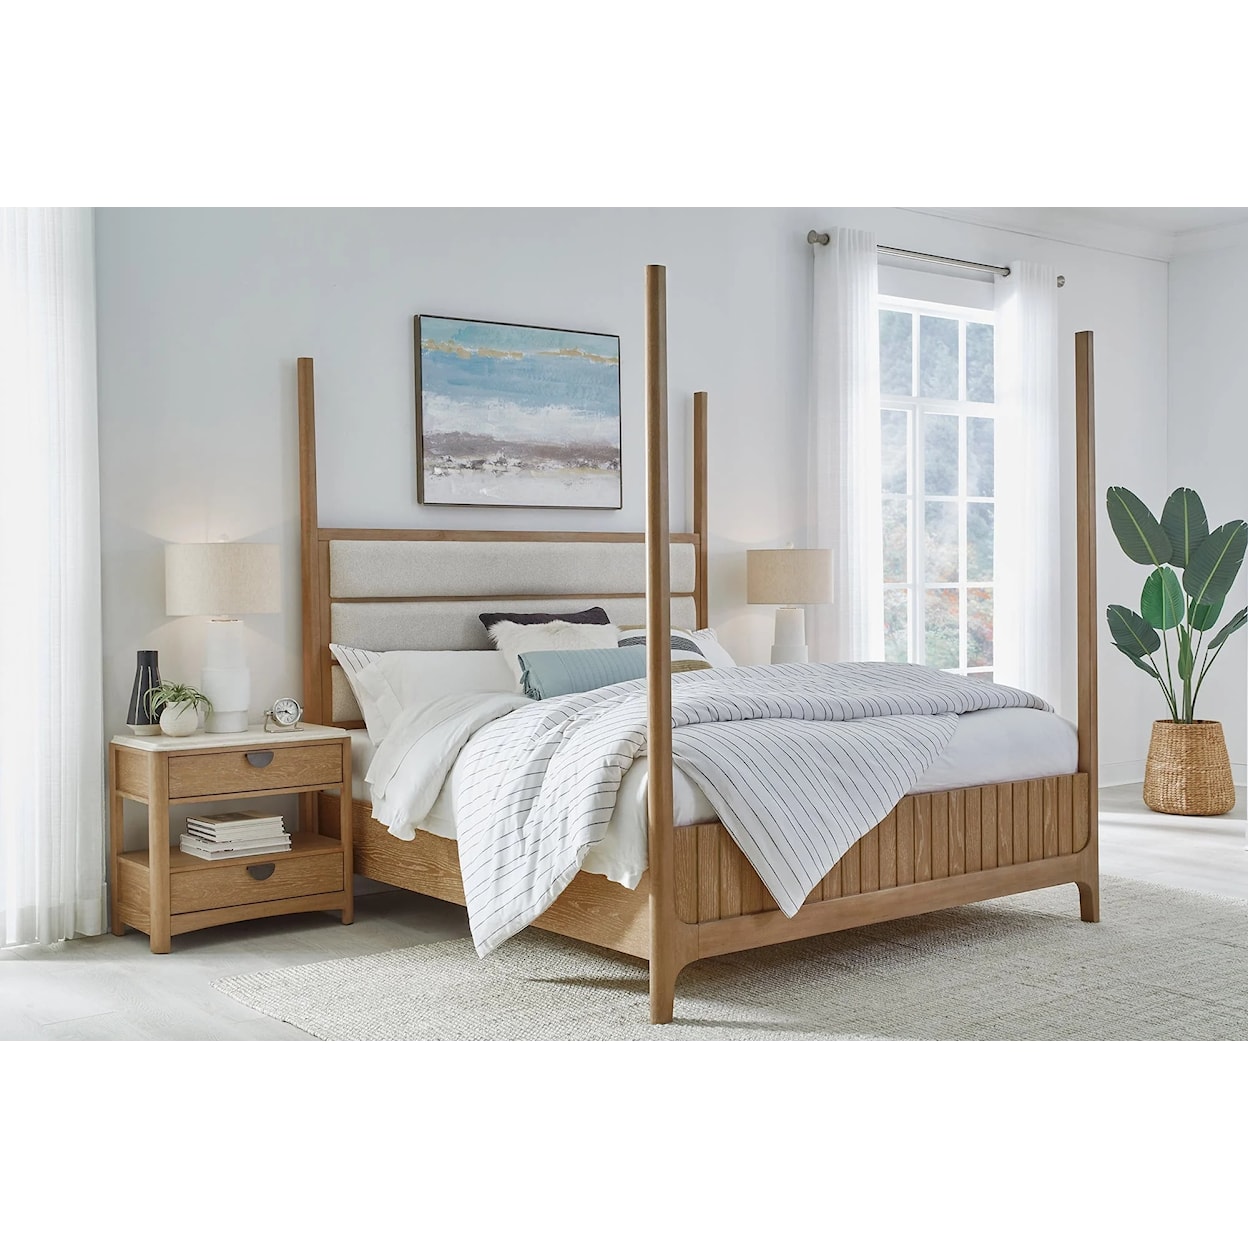 Nicola Home Escape King Poster Bed